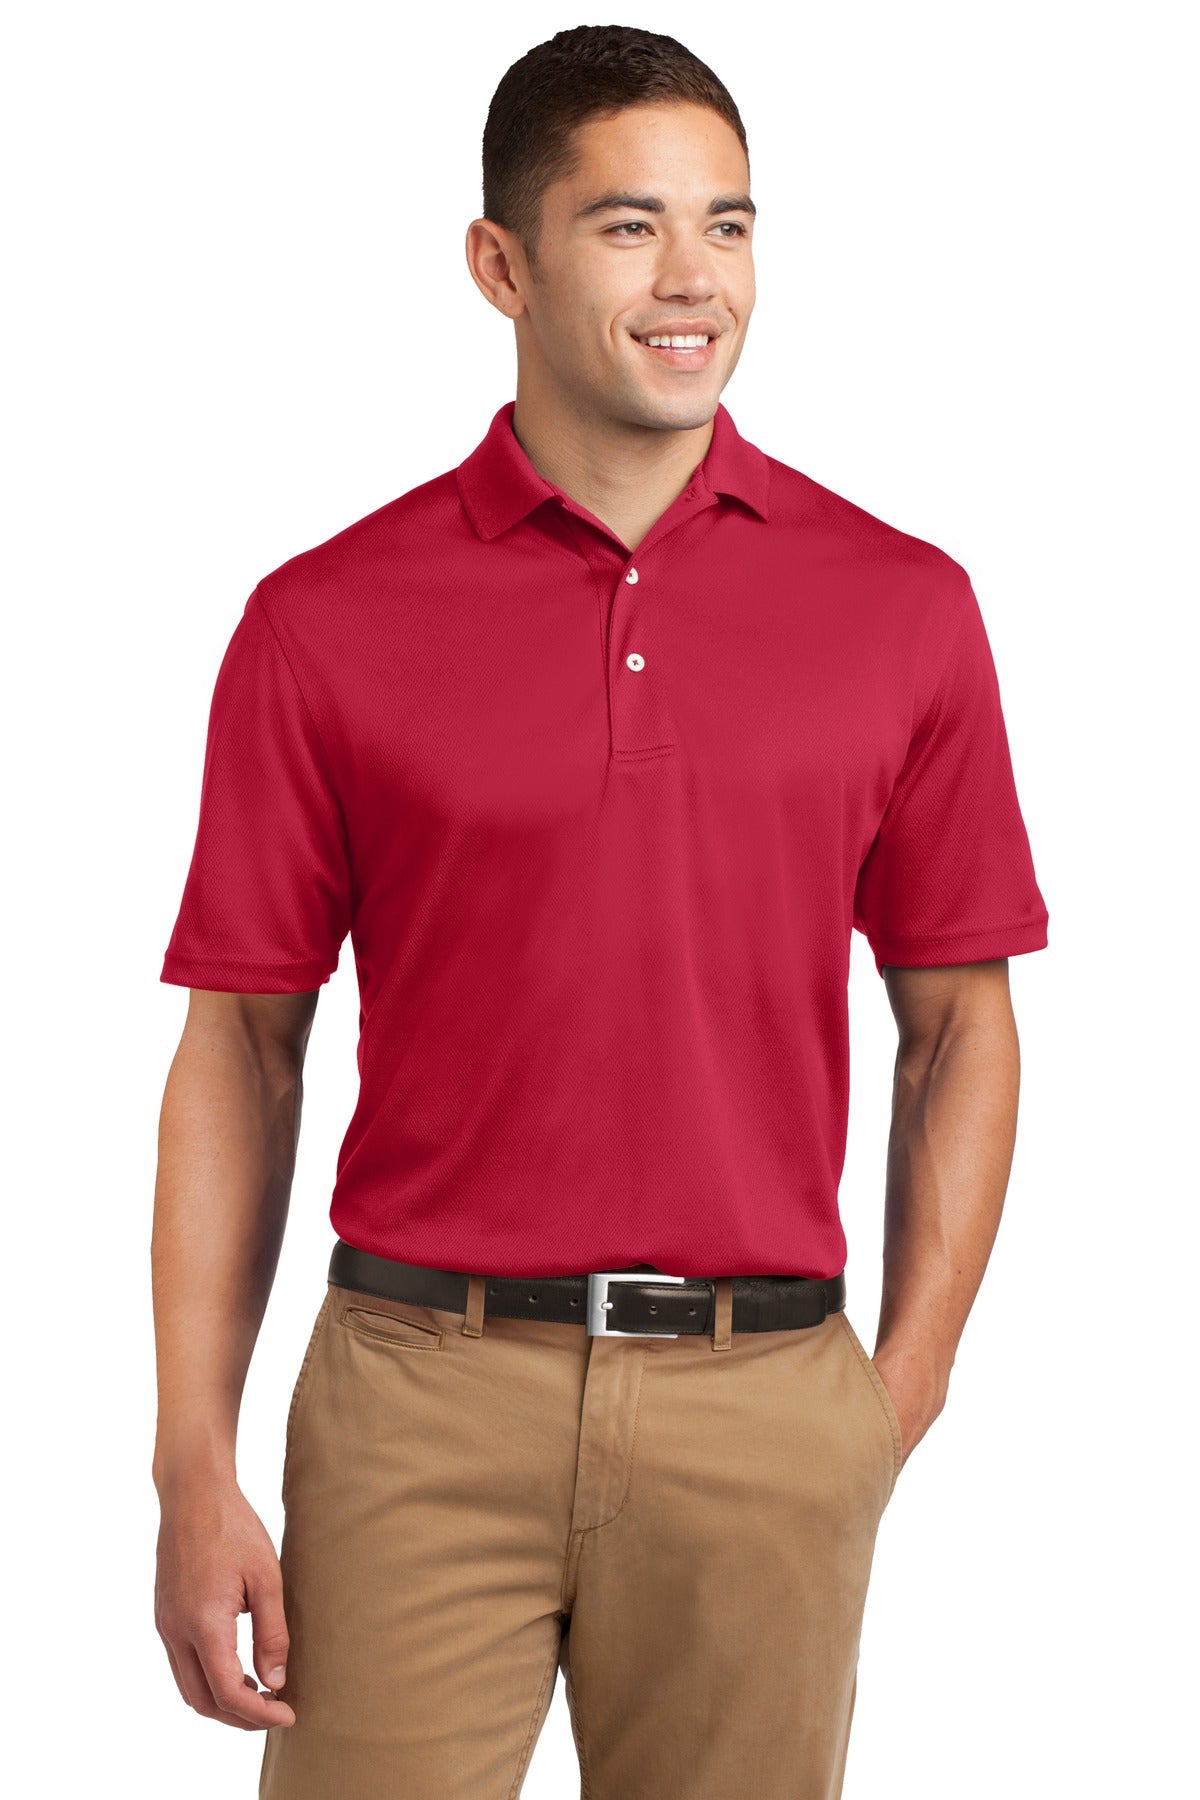 K469-Red-XS